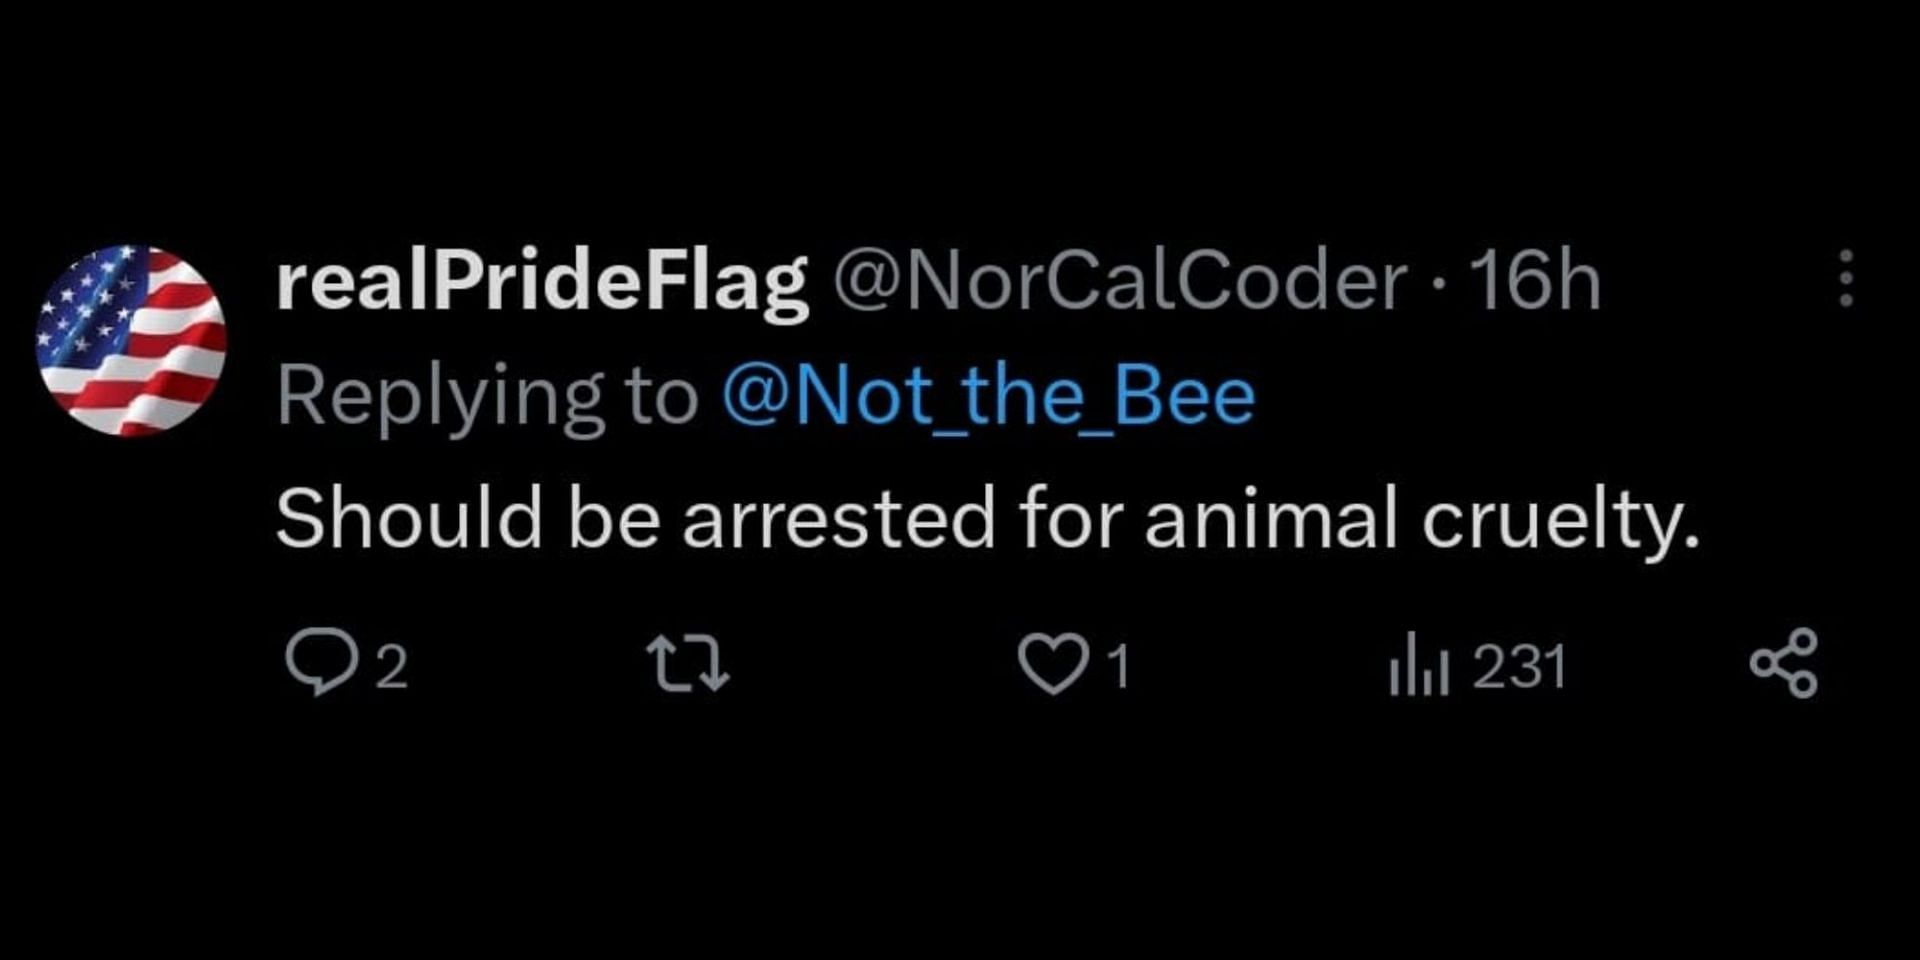 User accuses the men in the Panama City beach video of animal cruelty. (Image via Twitter/Not the Bee)